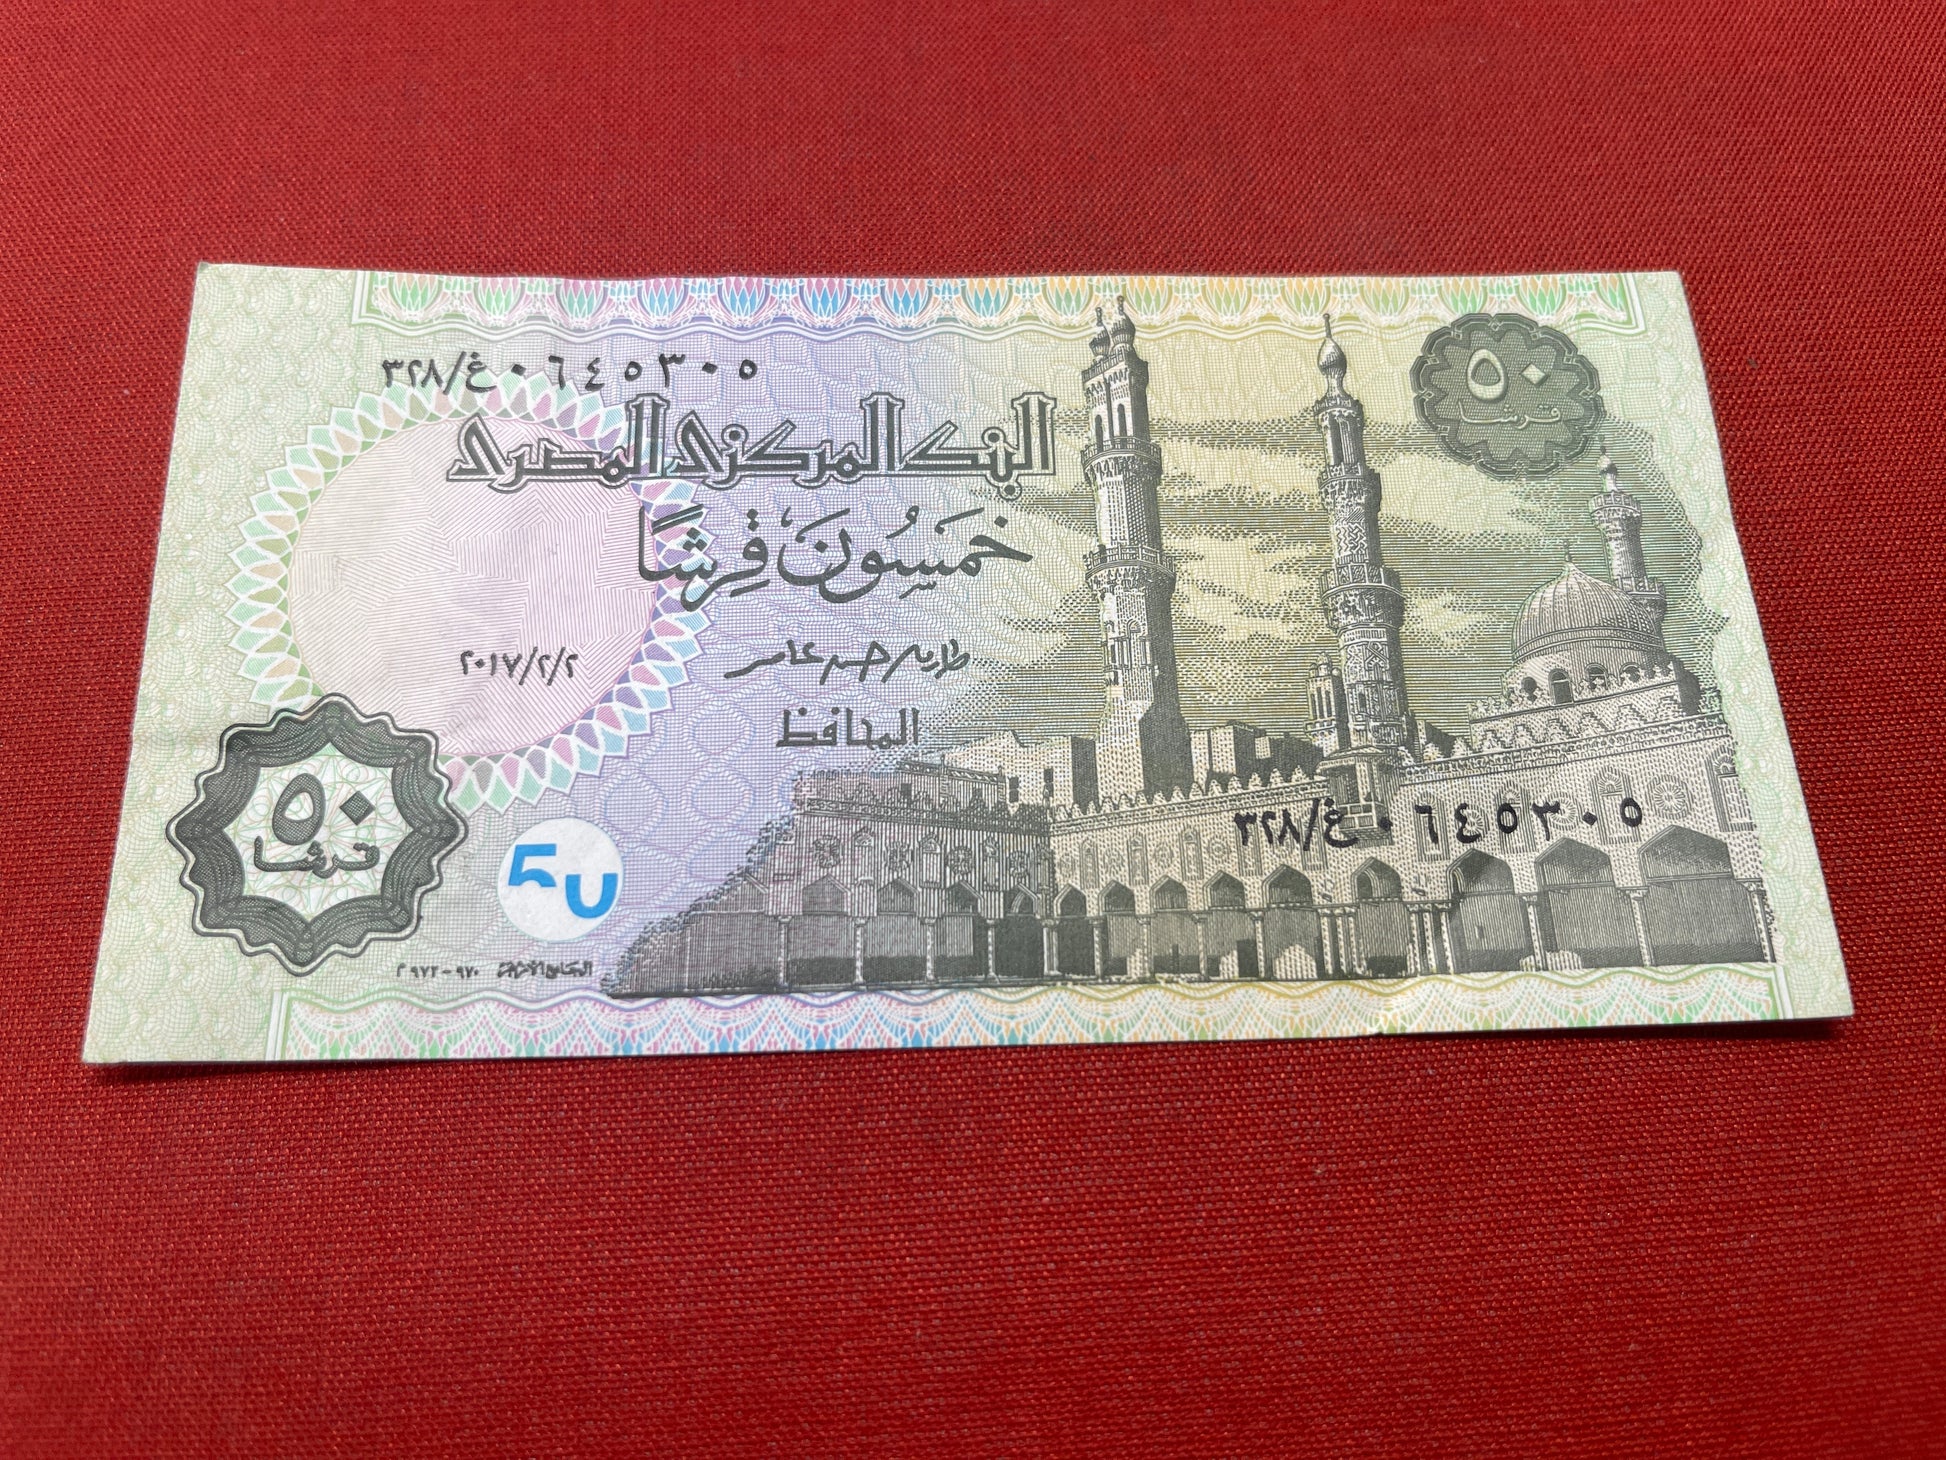  Central Bank of Egypt 50 Piastres